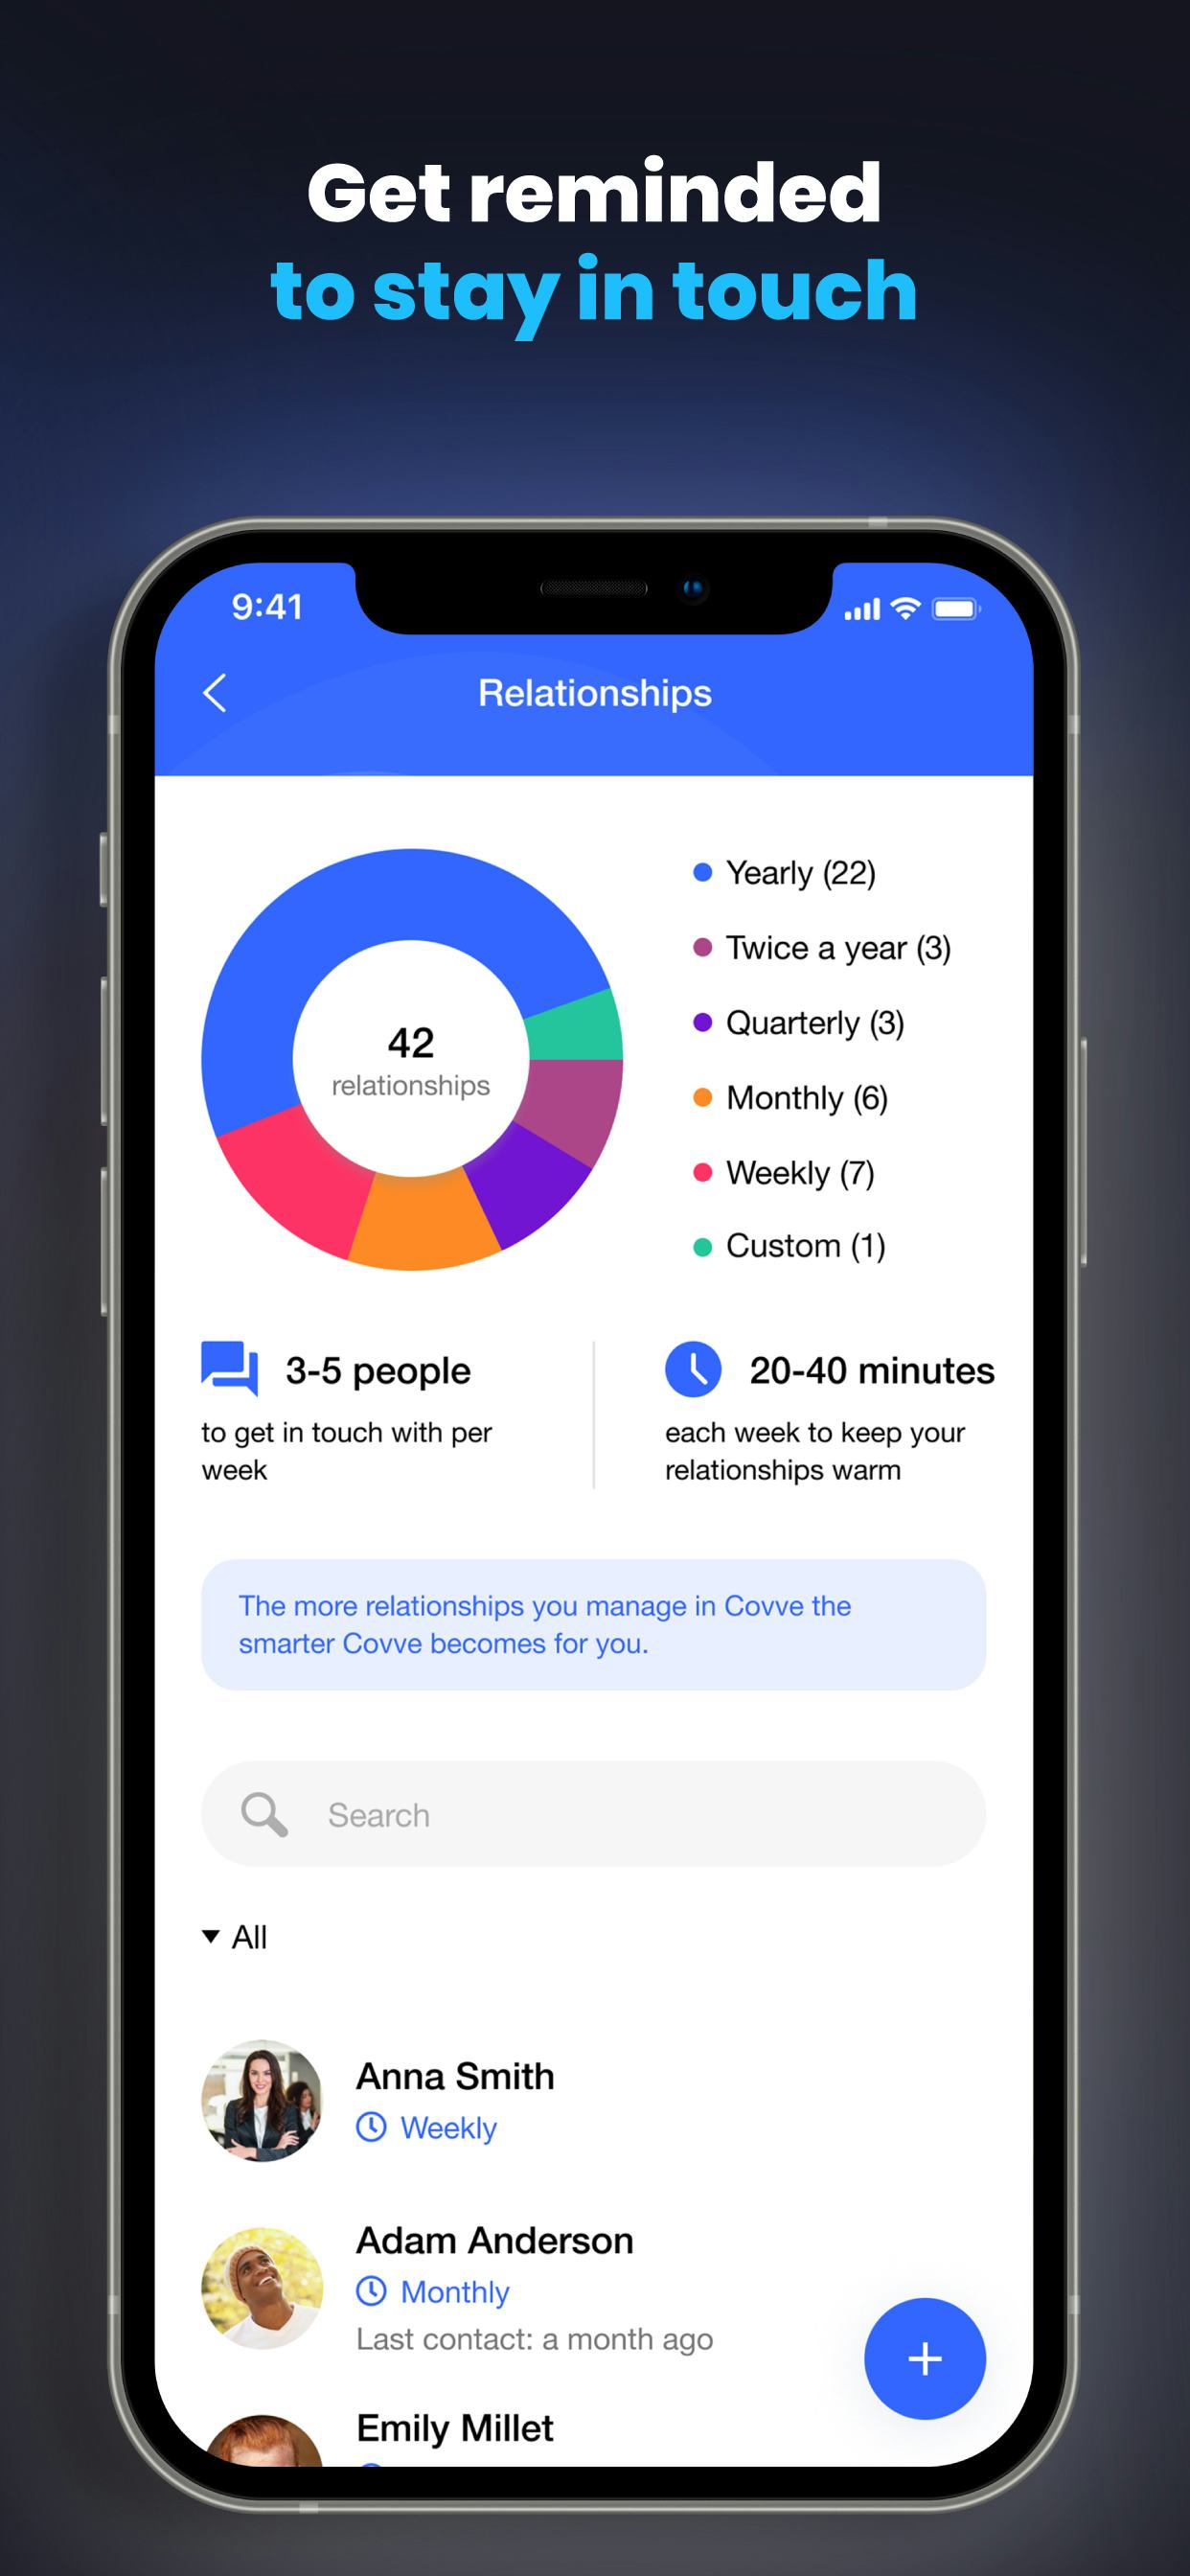 Covve App Software - Never let a relationship go cold. Easily manage your relationships on your phone - no setup required, just download and use.